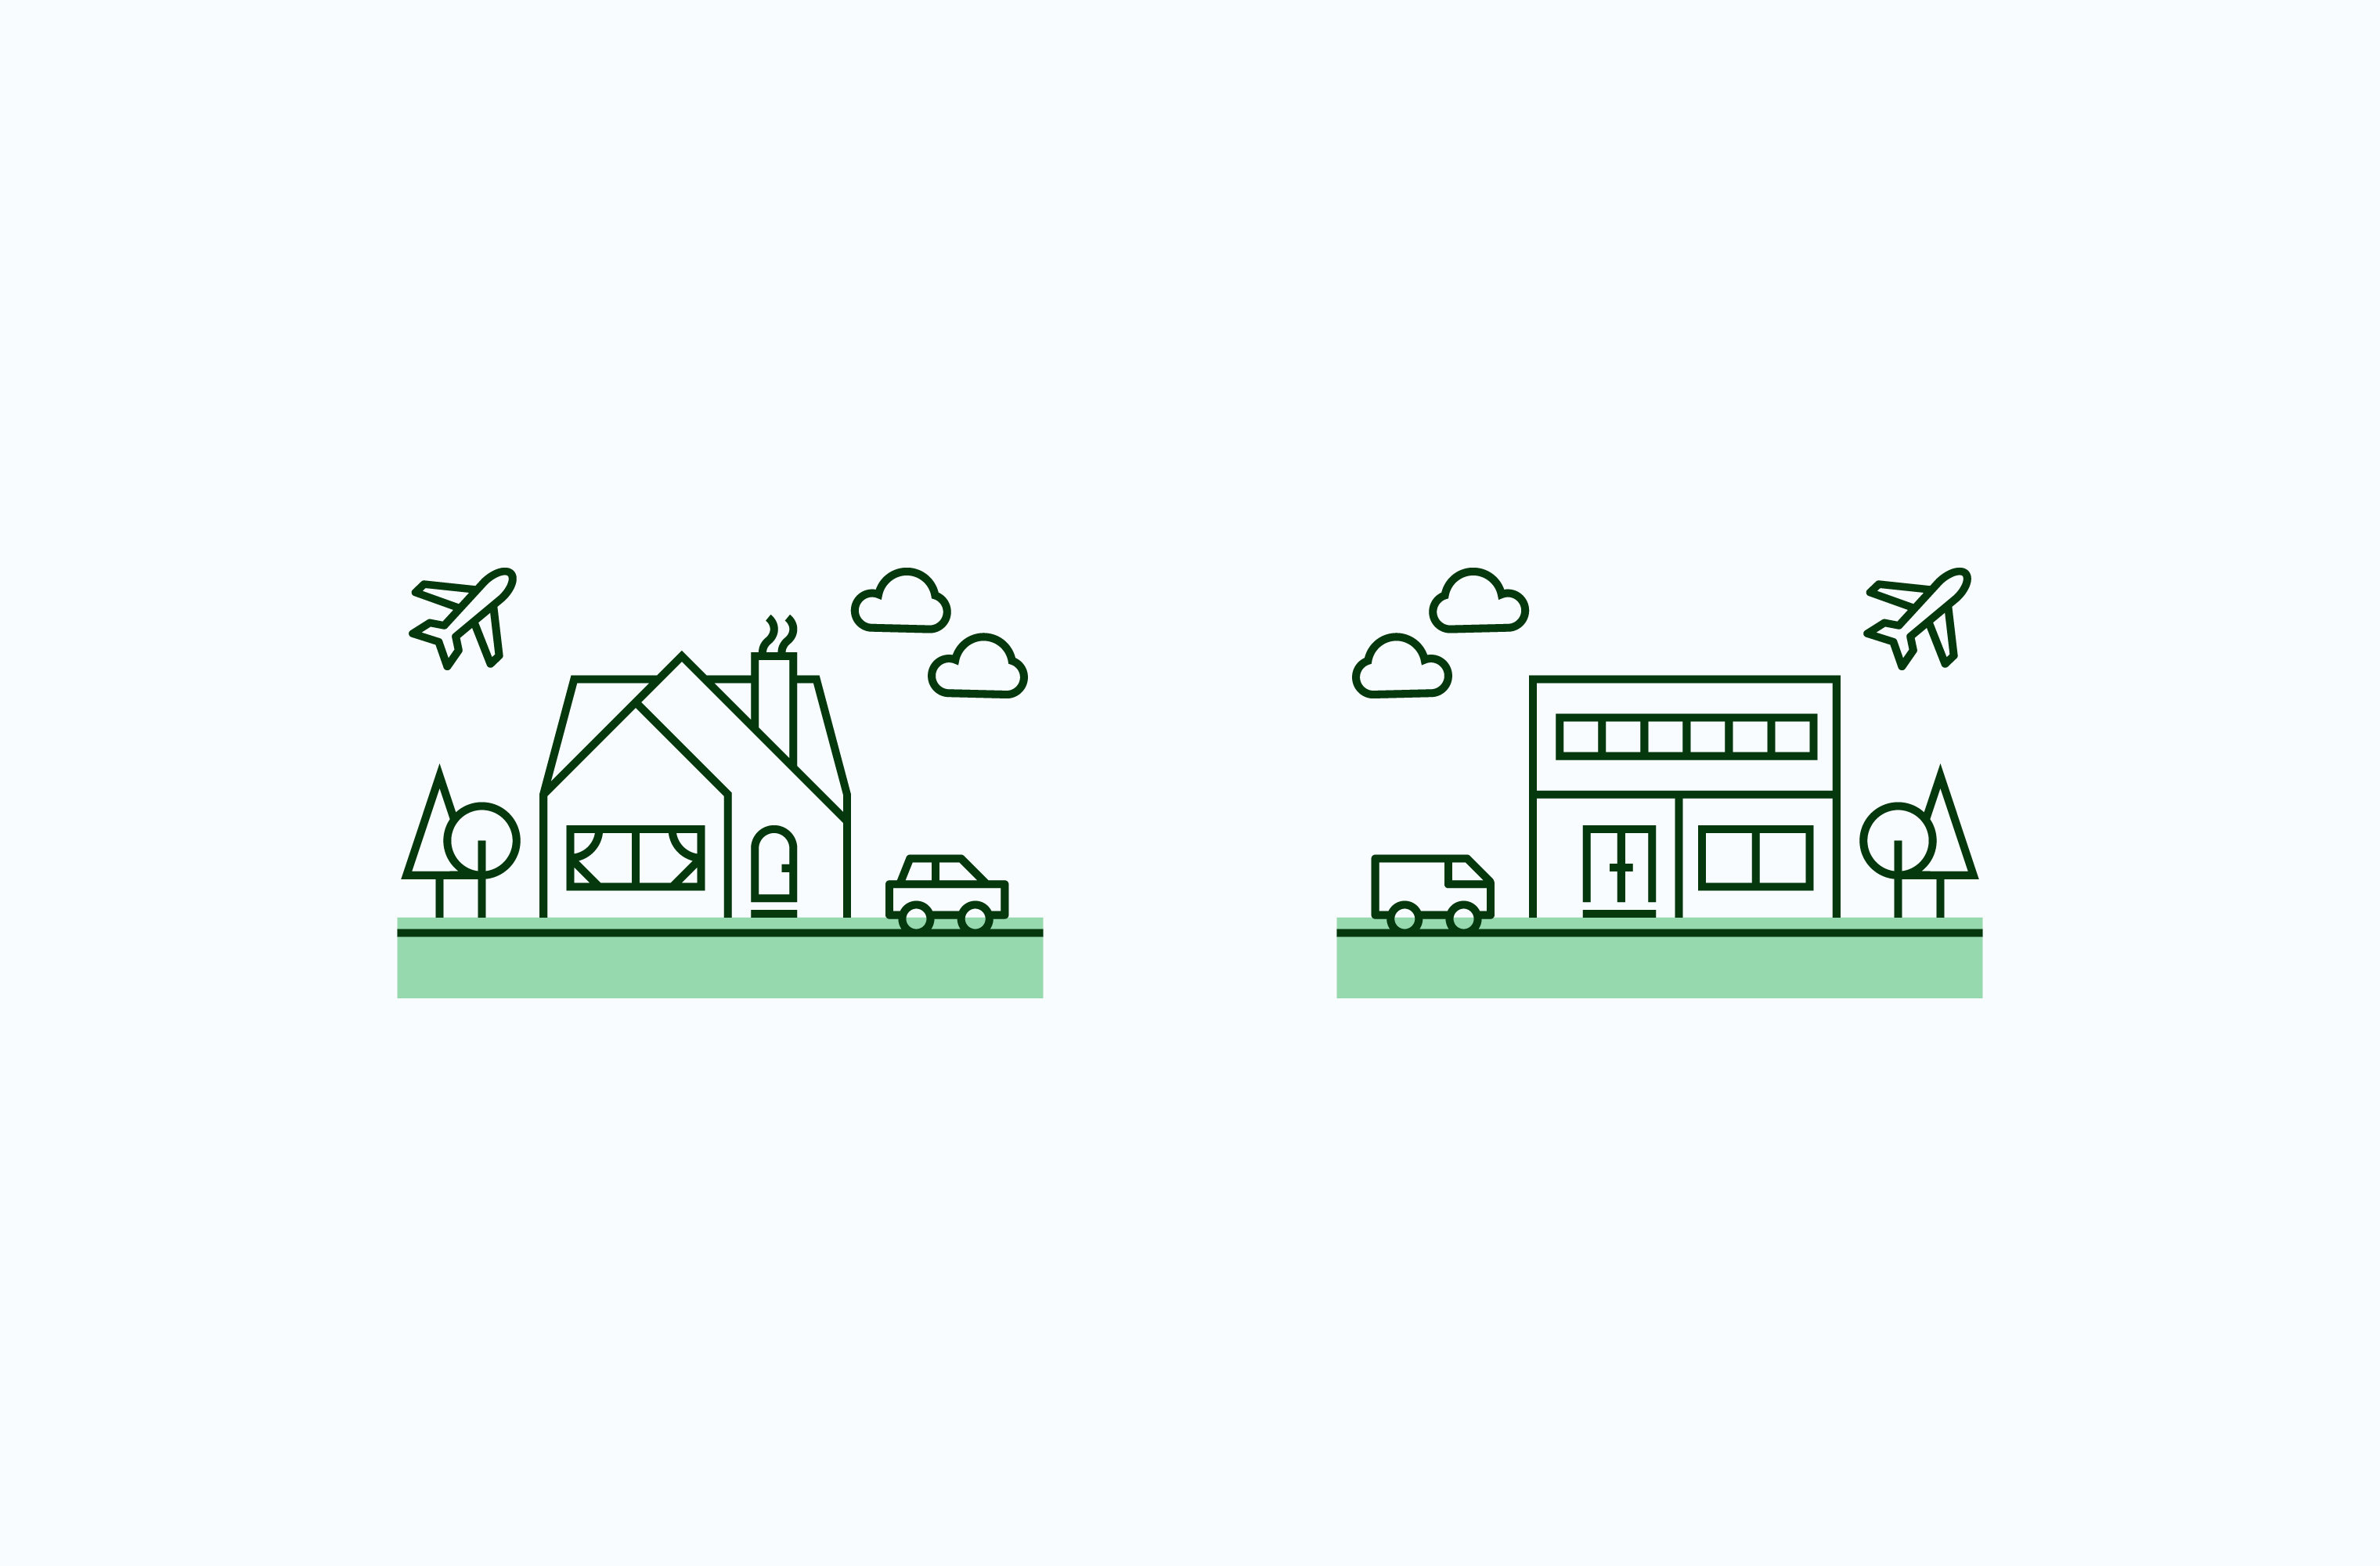 Carbonfund home and work icon set